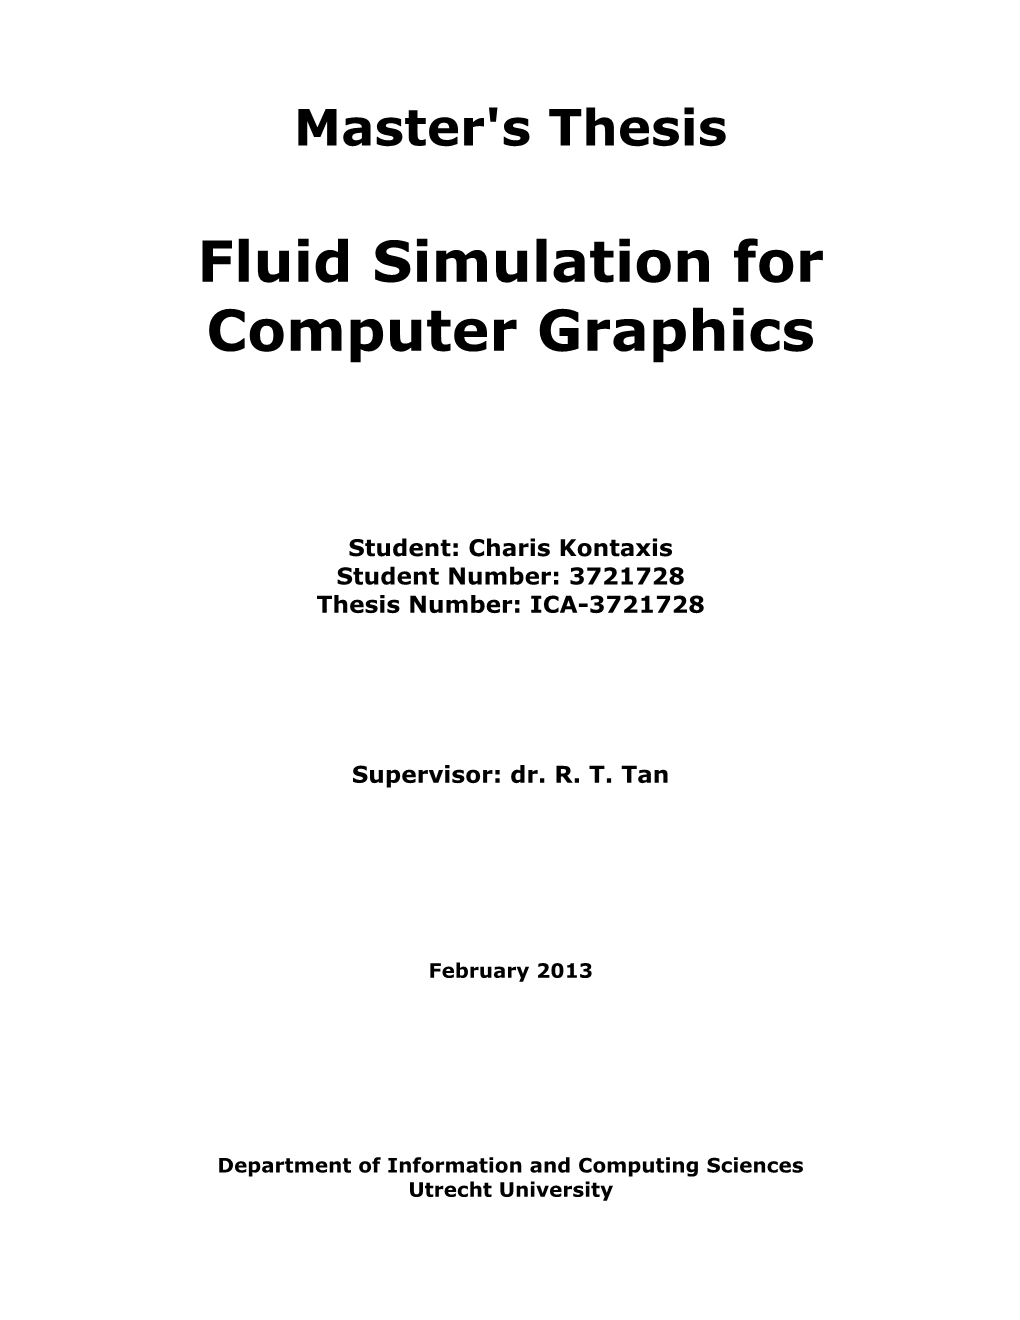 Fluid Simulation for Computer Graphics